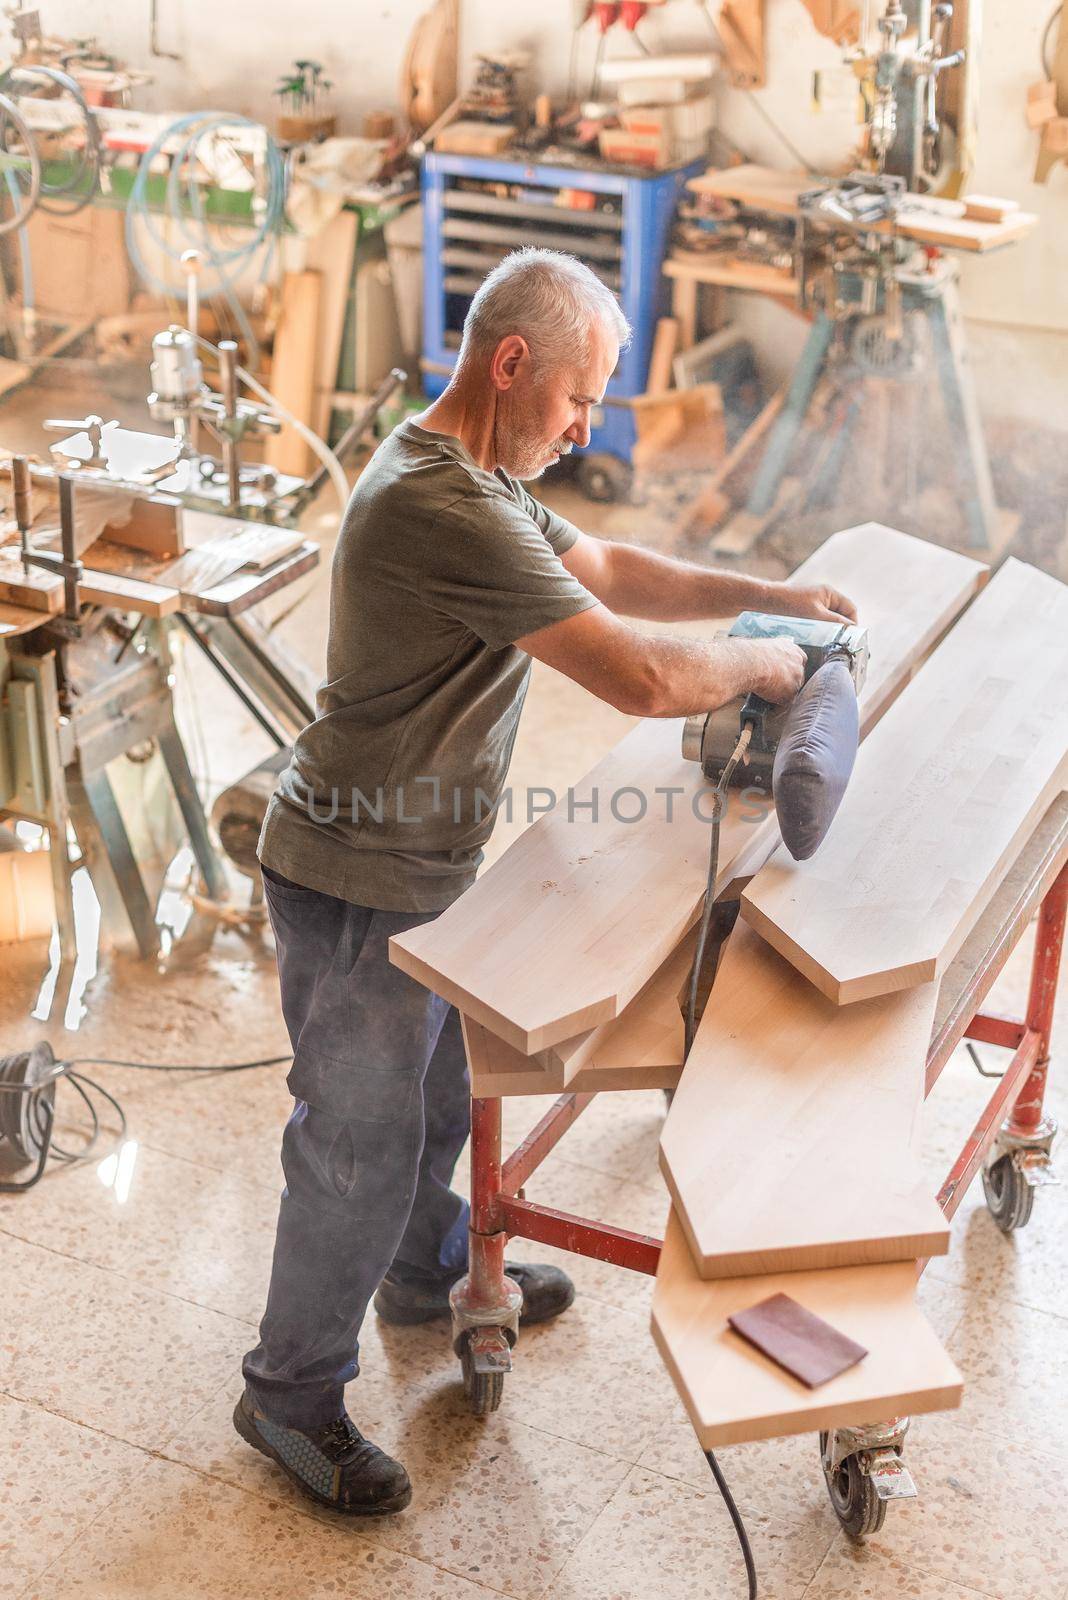 Man working with a hand sander polishing a wooden board, vertical